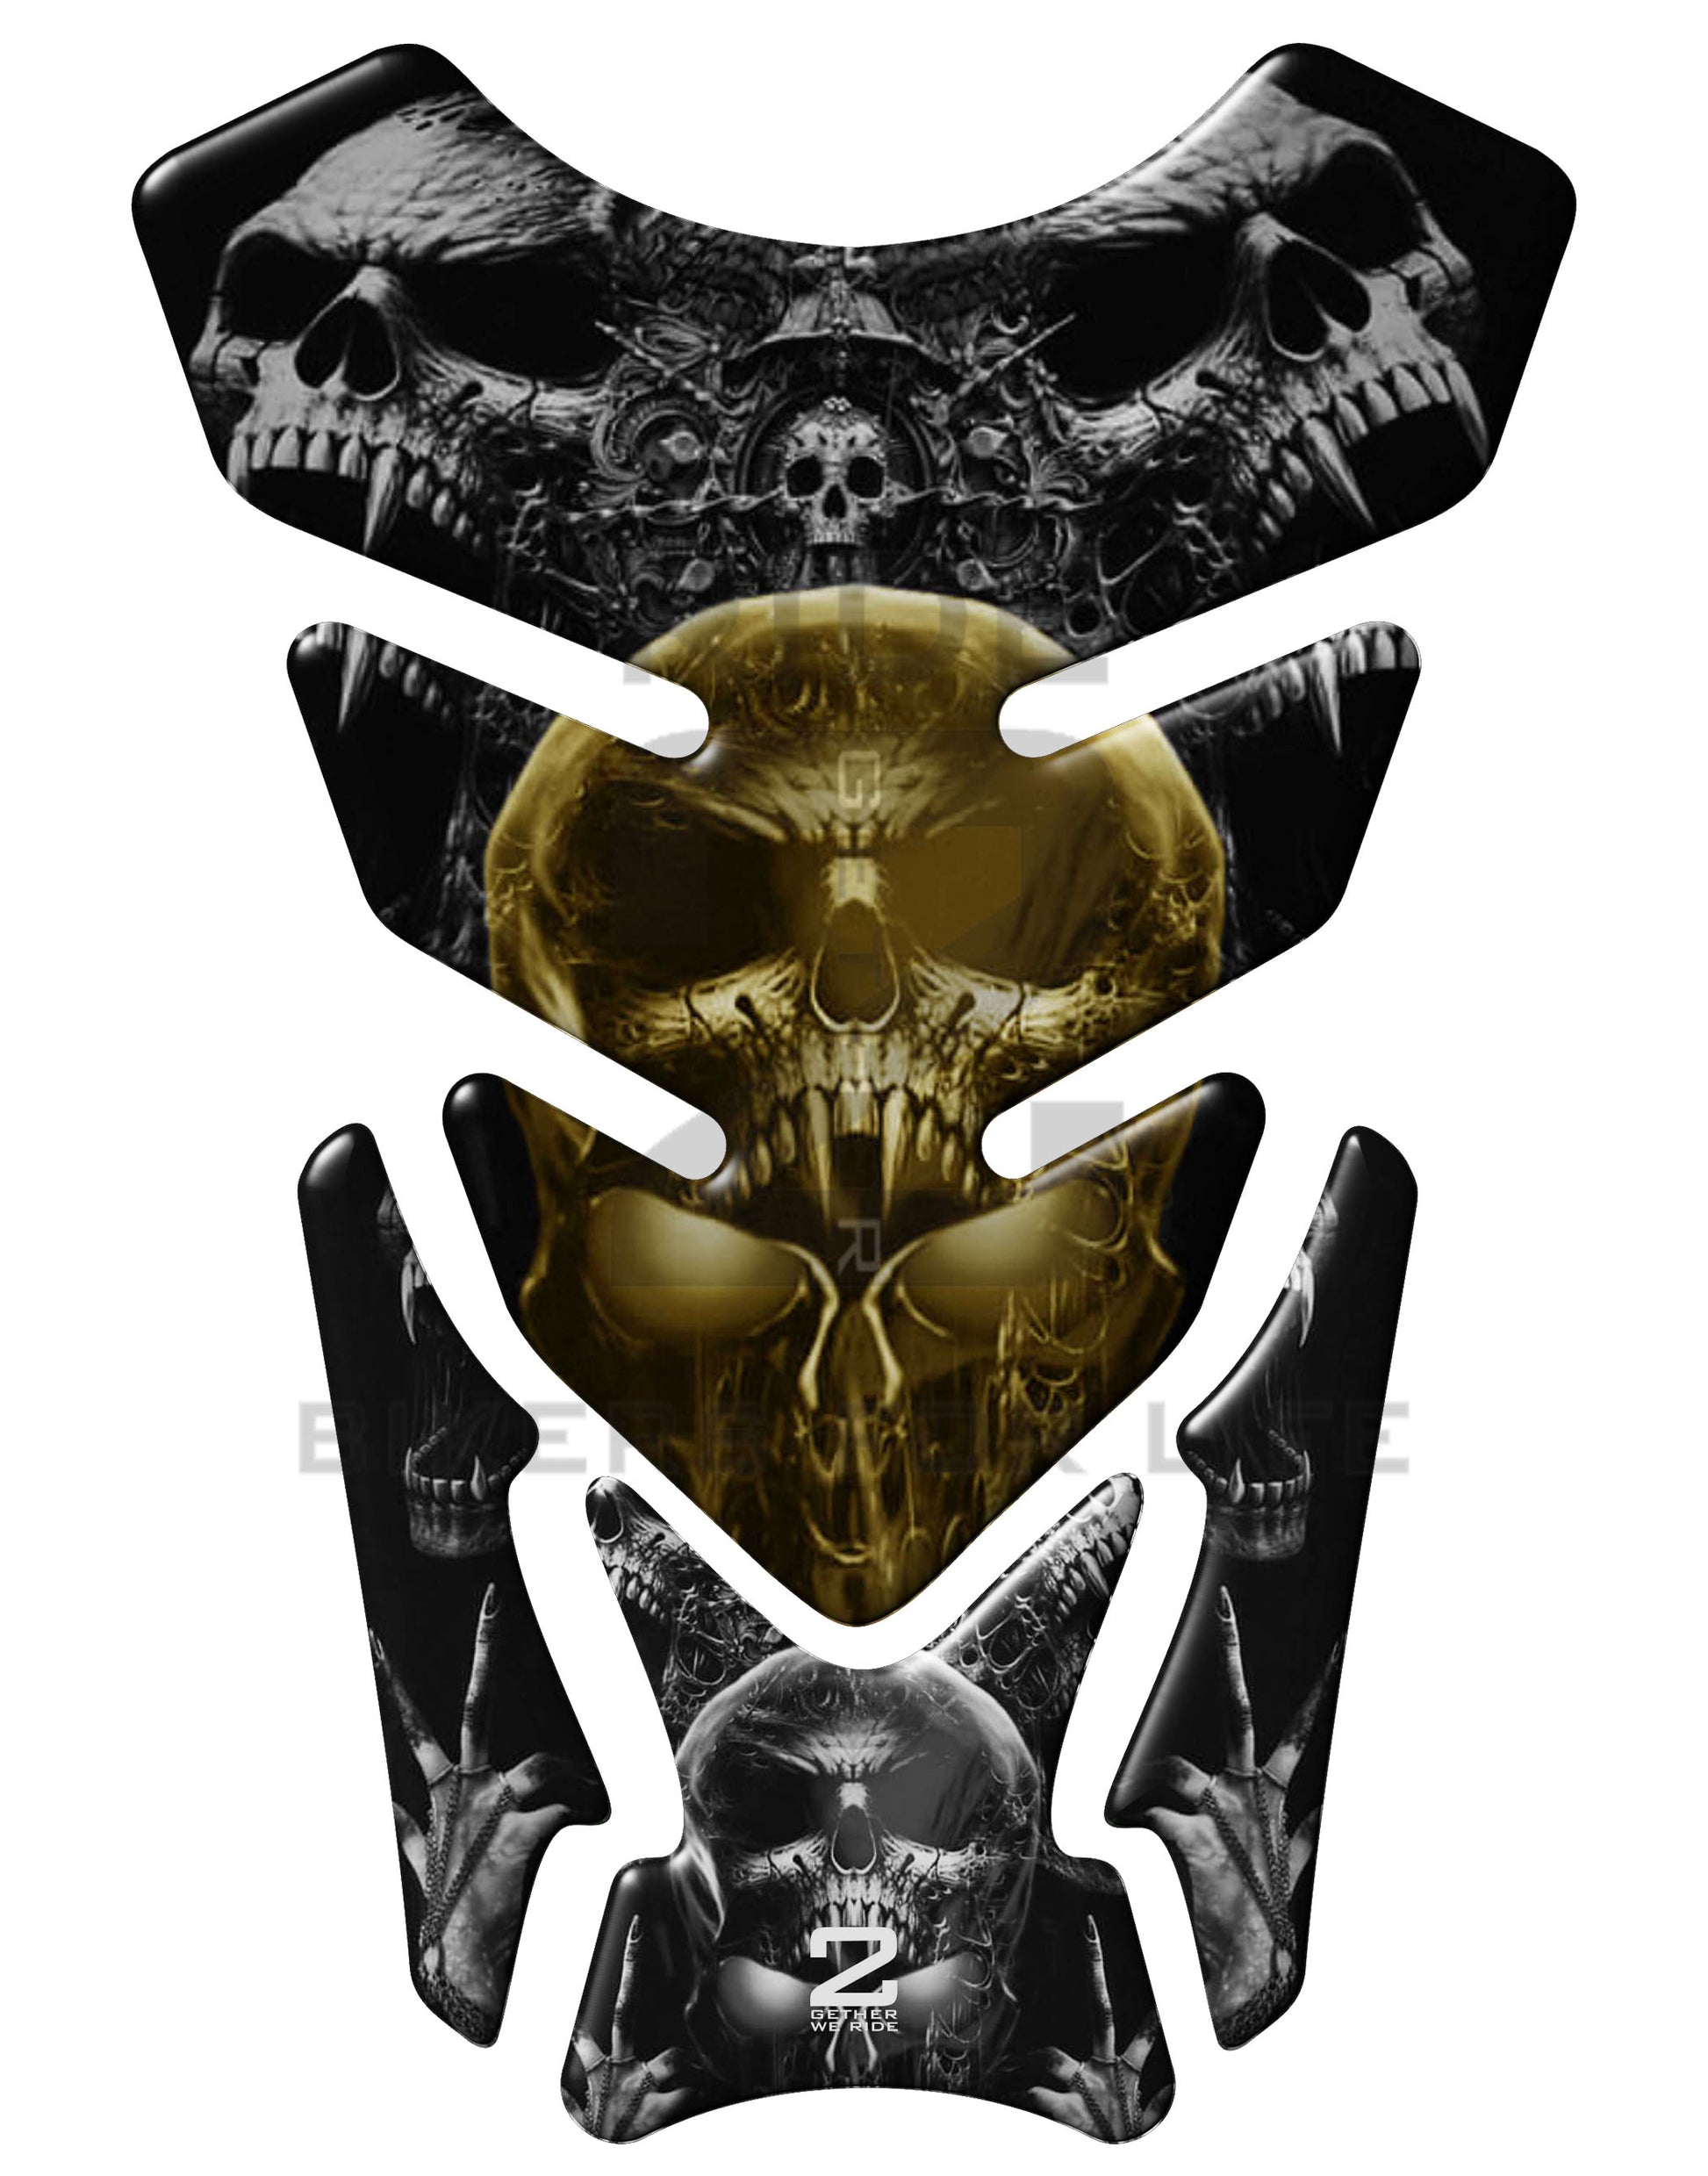 Universal Fit Black and Gold Bling Skull  Motor Bike Tank Pad Protector.  A Street Pad which fits most motorcycles.